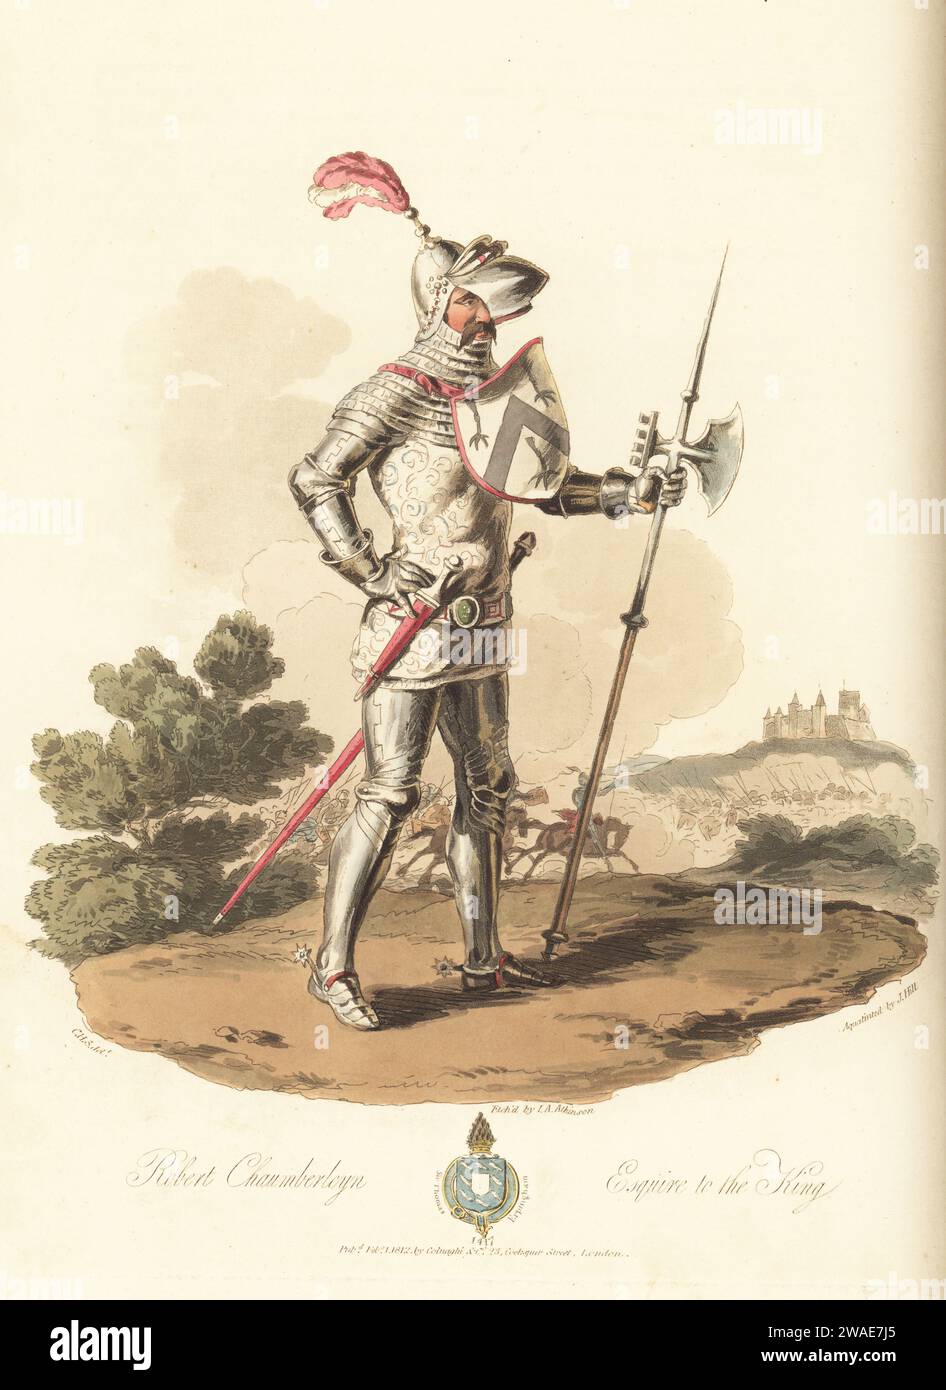 Robert Chaumberleyn, Esquire to King Henry V, 15th century. In full battle armour with vizored helmet, flowered silver surcoat, plate armour, emblazoned shield, armed with battle axe, sword and daggers. With Sir Thomas Erpingham's coat of arms. From Benefactor's Book, Cotton MS Nero D VII, f. 142v. Handcoloured copperplate engraving etched by John Augustus Atkinson, aquatinted by John Hill, after an illustration by Charles Hamilton Smith from his own Selections of Ancient Costume of Great Britain and Ireland, Colnaghi and Co., London, 1814. Stock Photo